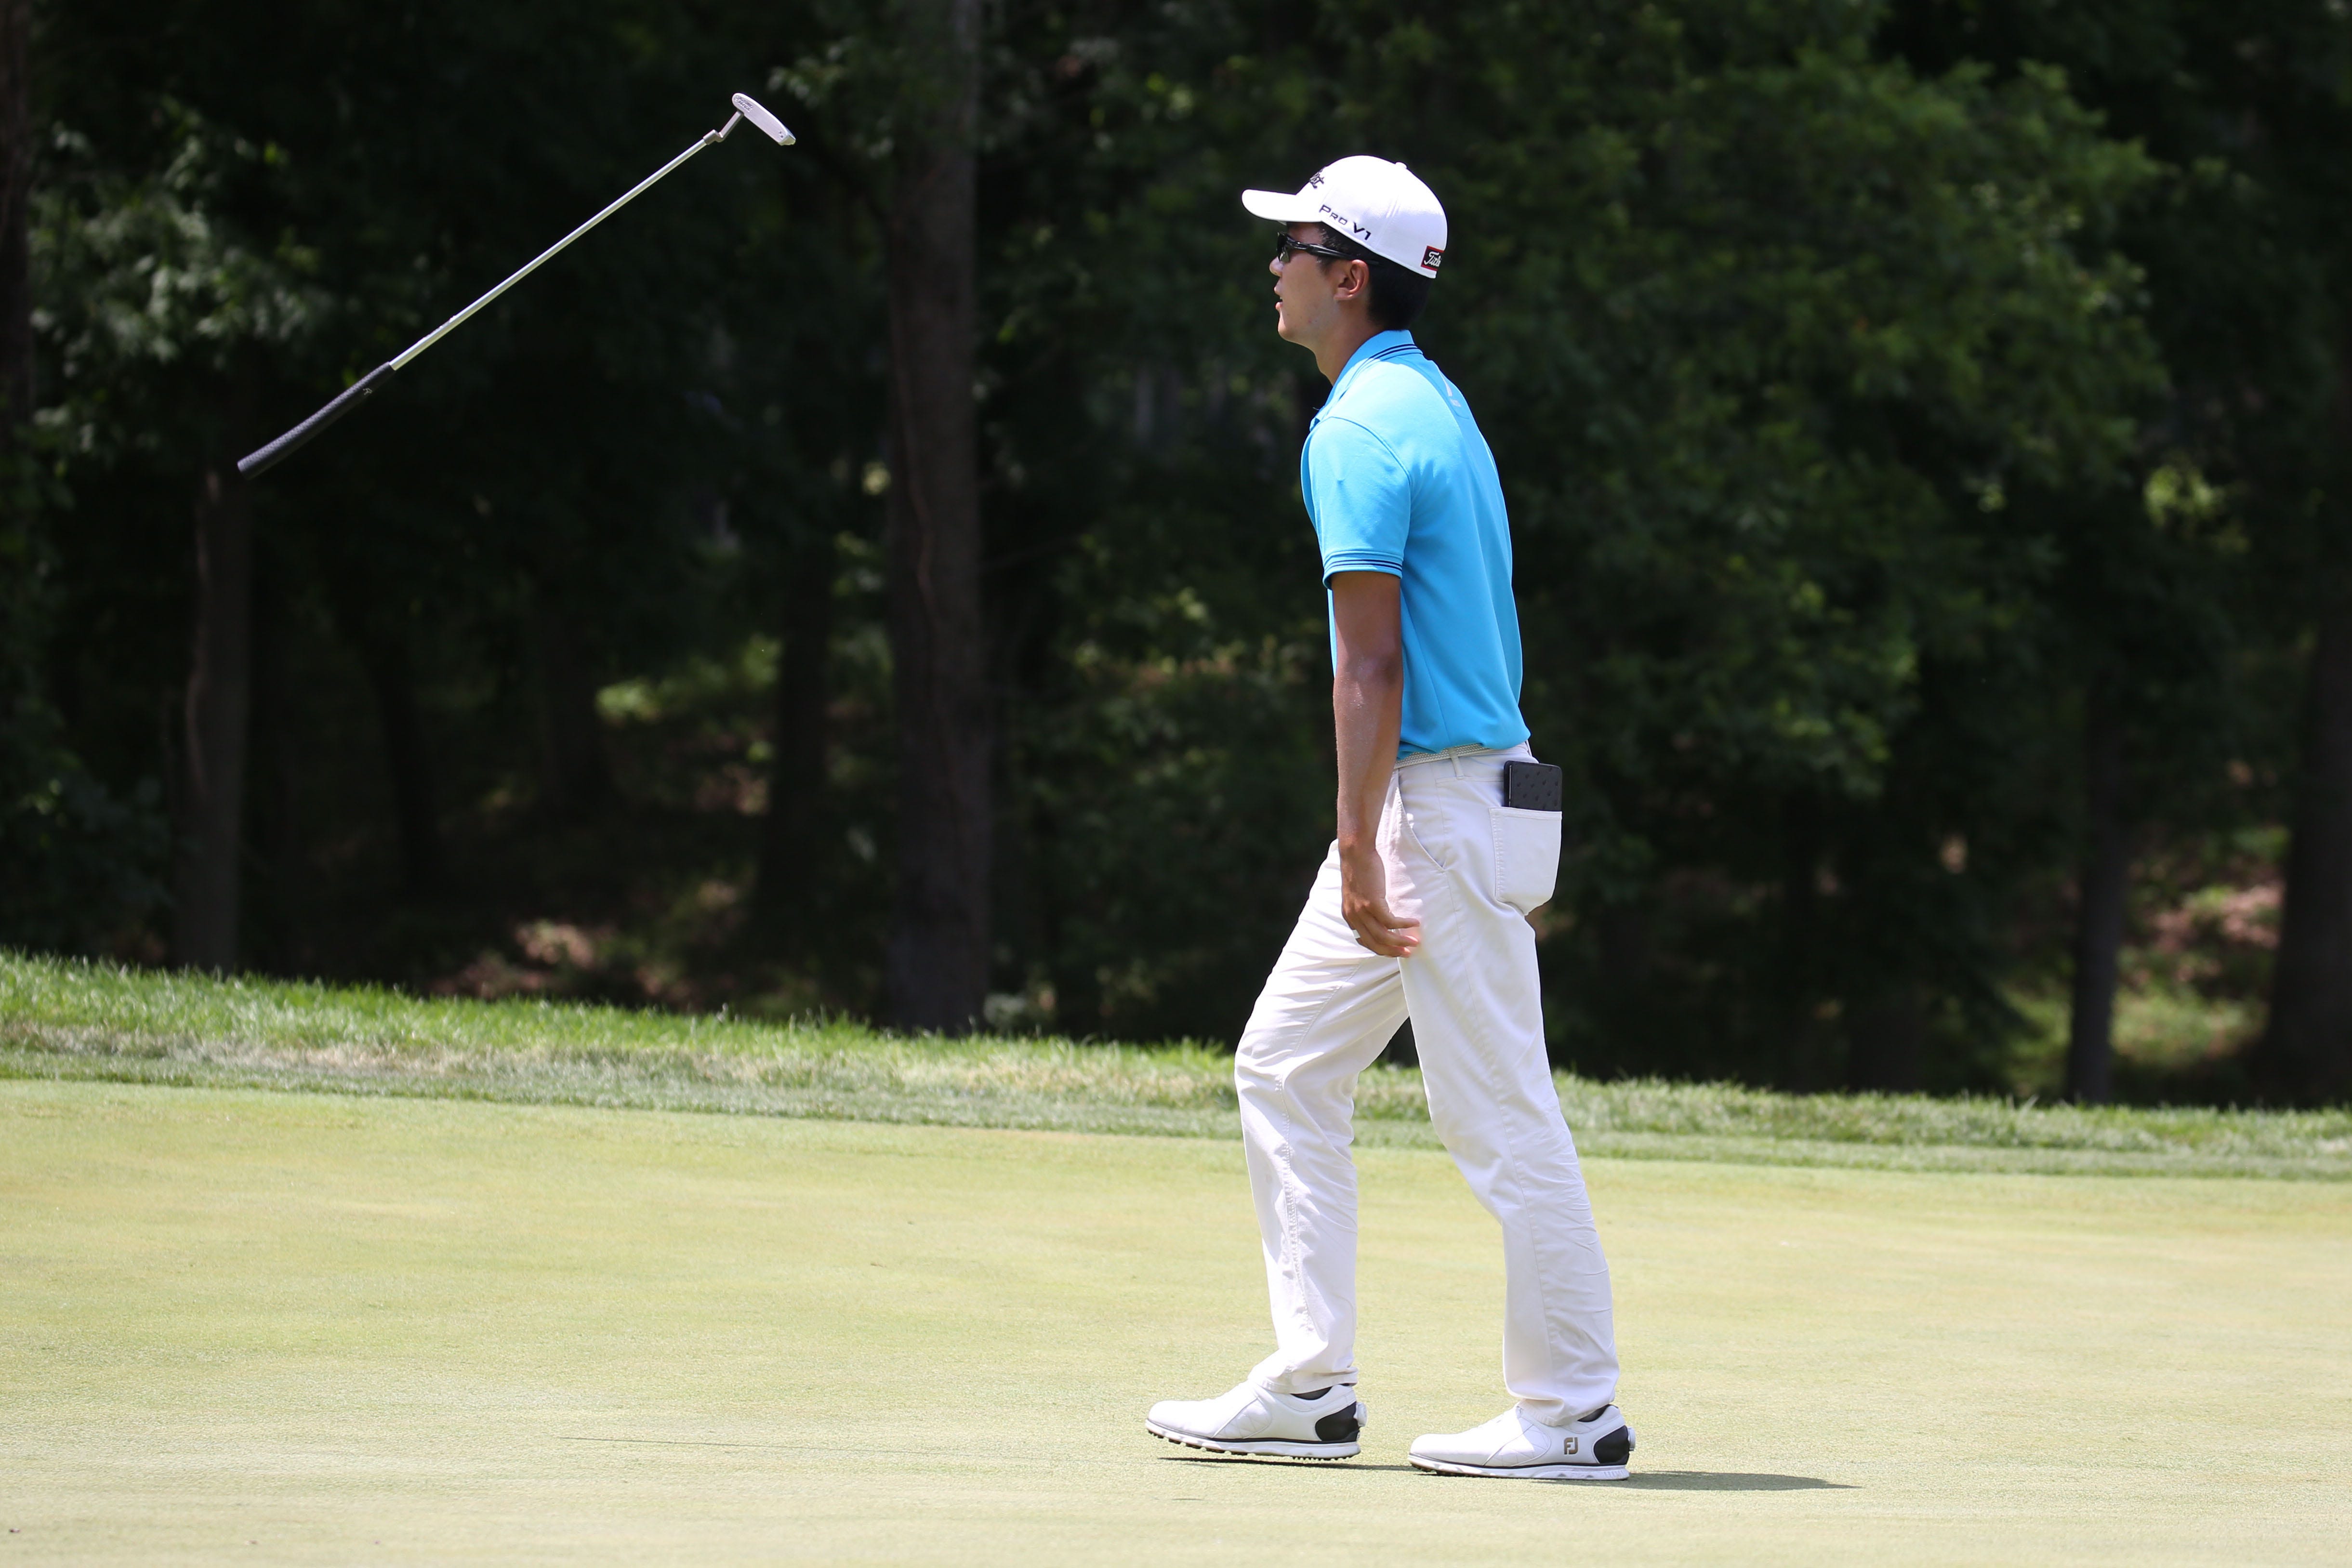 PGA golfer Michael Kim reacts to missing a birdie putt on the 9th hole by tossing his putter in the air during the first round of the John Deere Classic golf tournament at TPC Deere Run.